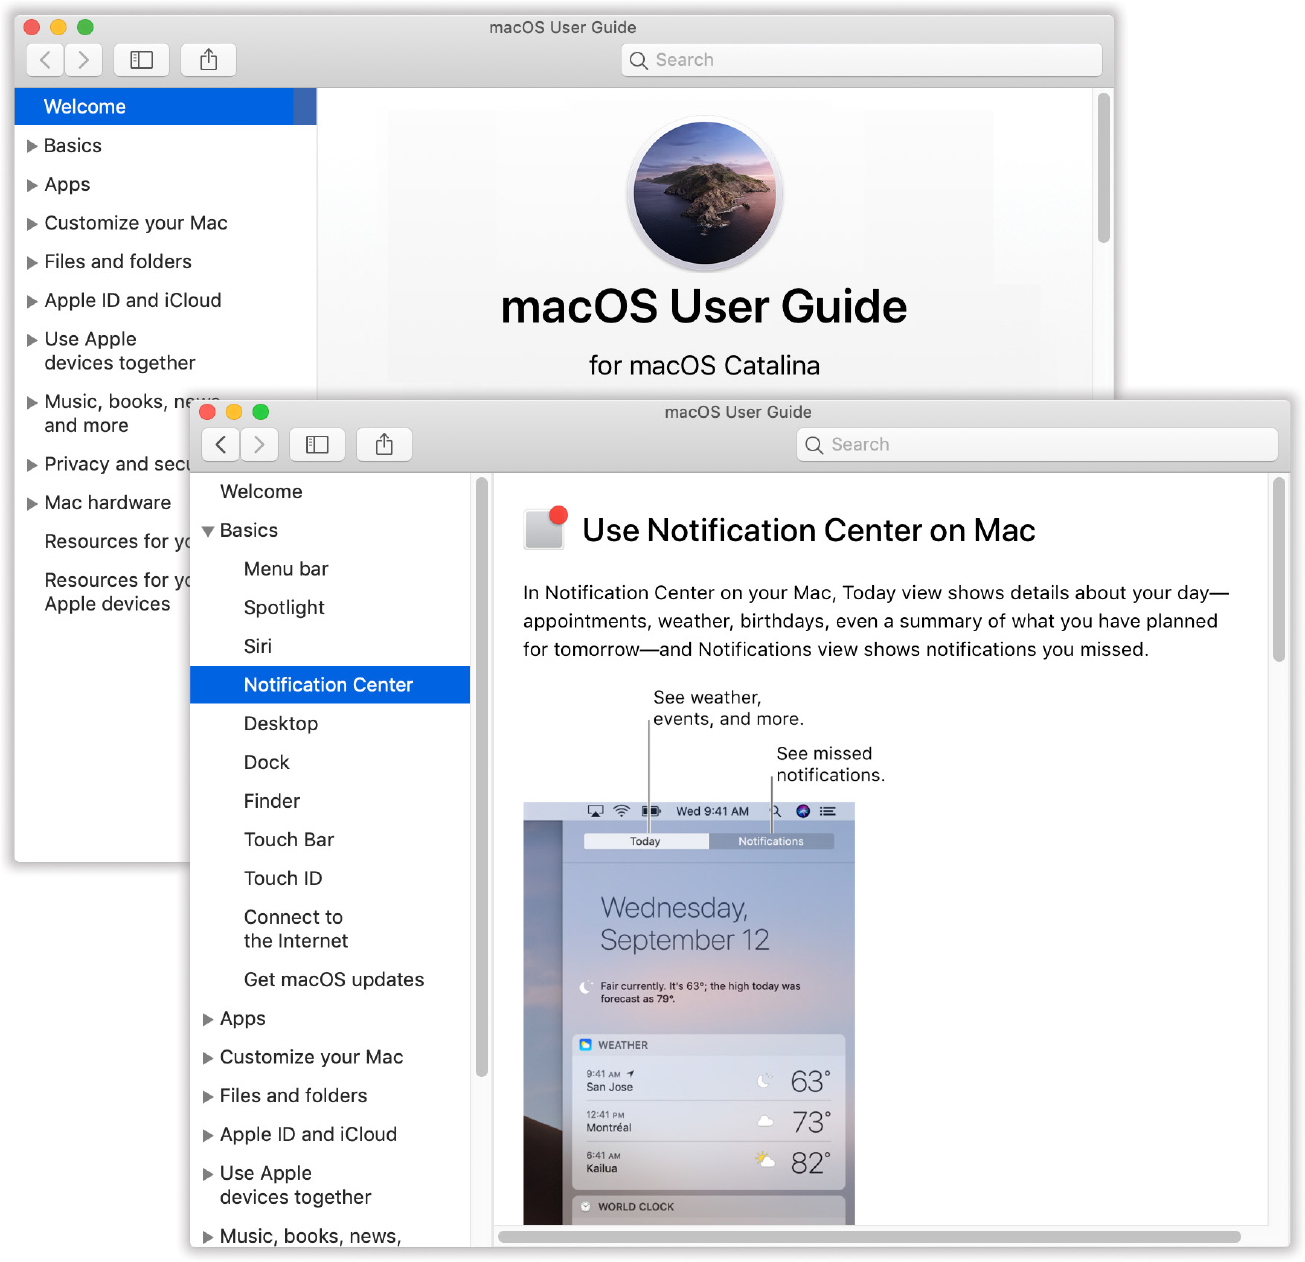 Mac Help likes to help with big-ticket tasks like joining a network, setting up email, or browsing the web. Once you perform a search for some topic, or use the left-side topic list to drill down (bottom), you get a details page that offers a list of finely grained step-by-steps.